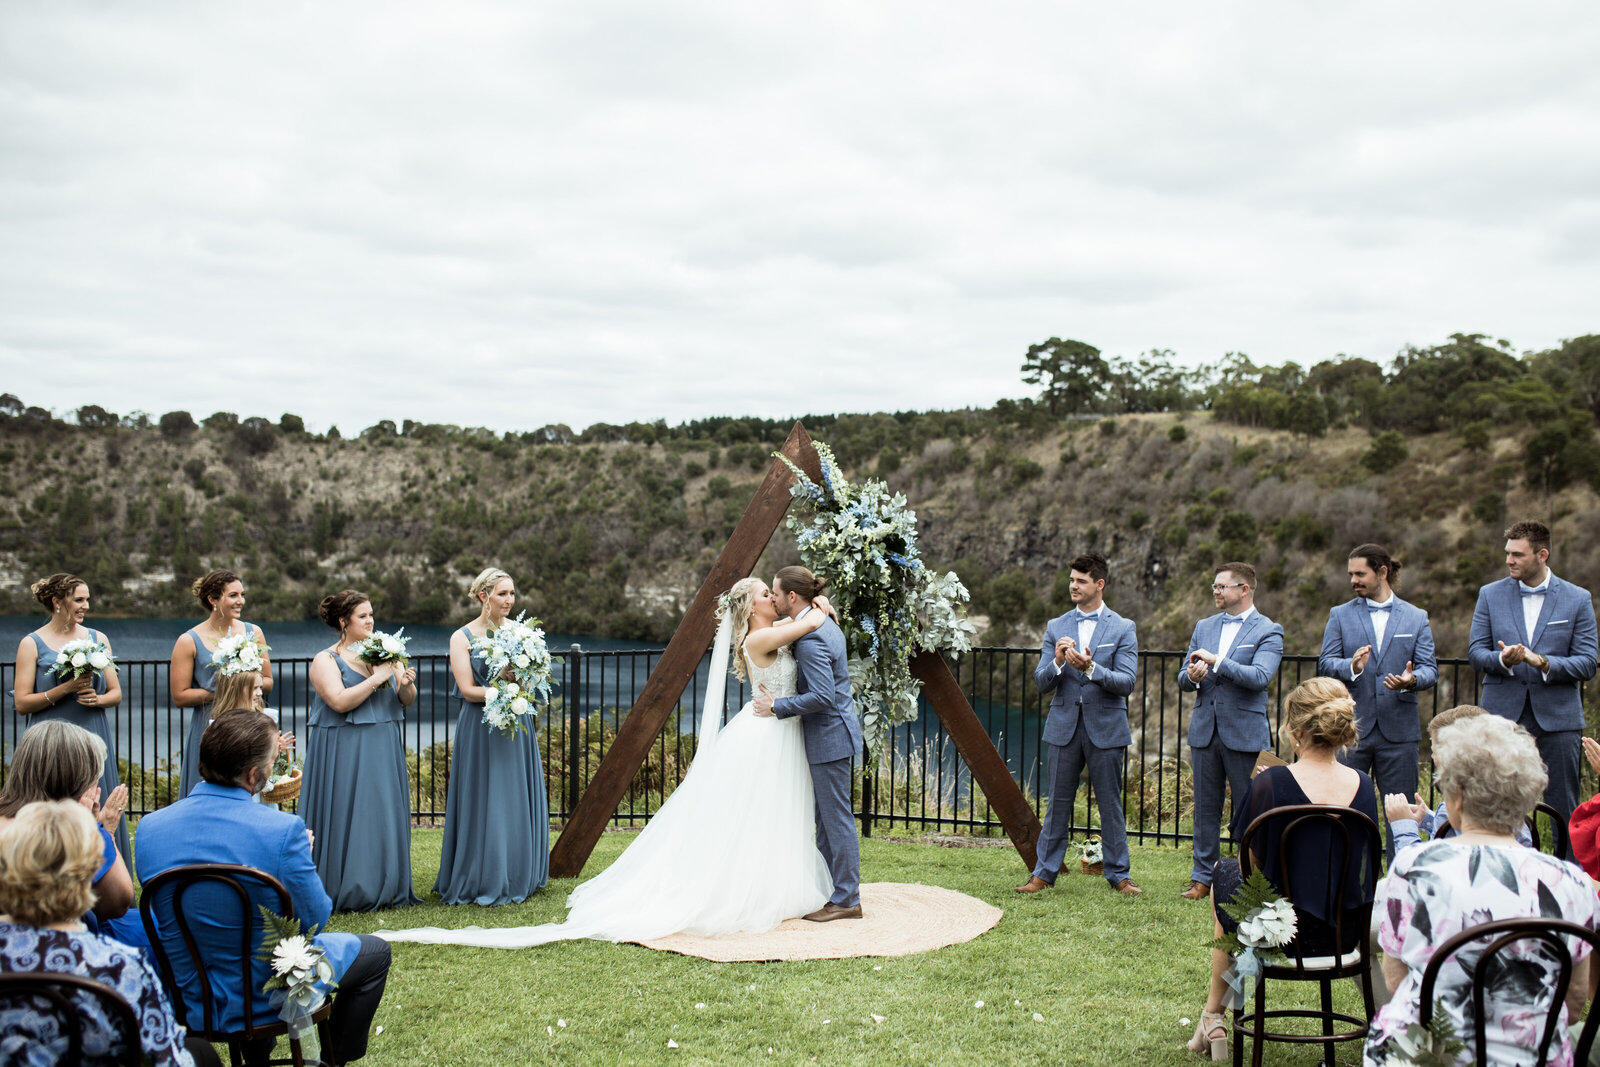 Meagan-Charlie-Wedding-Mount-Gambier-Rexvil-Photography-59